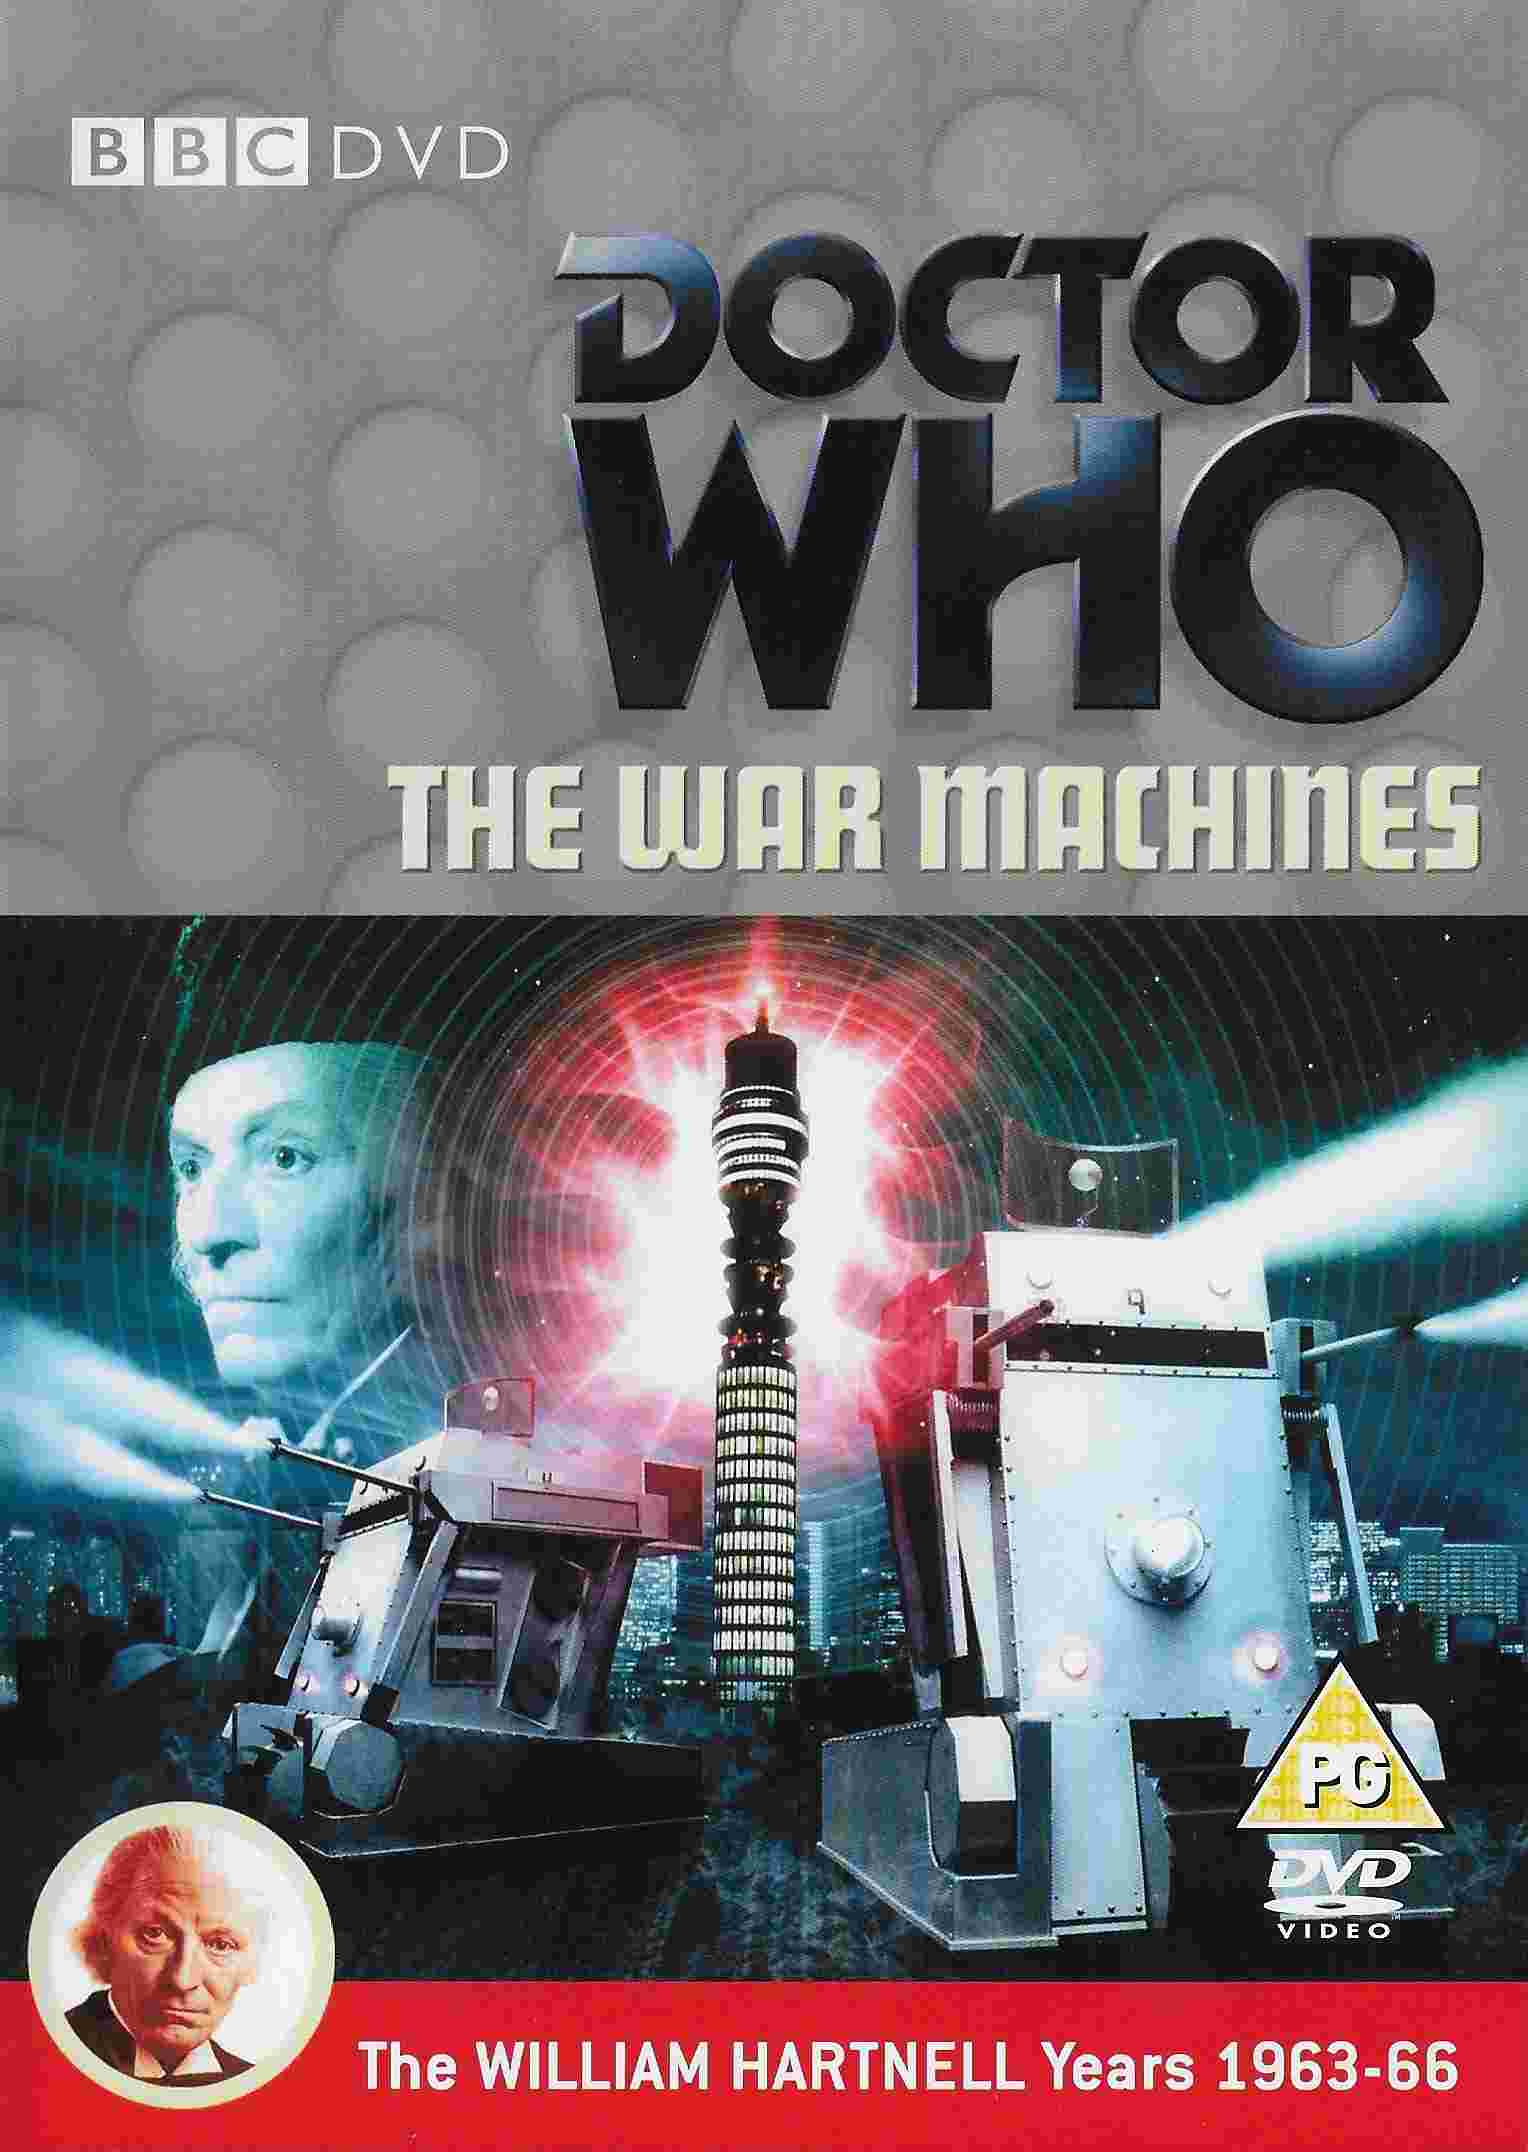 Picture of BBCDVD 2441 Doctor Who - The war machines by artist Ian Stuart Black from the BBC dvds - Records and Tapes library